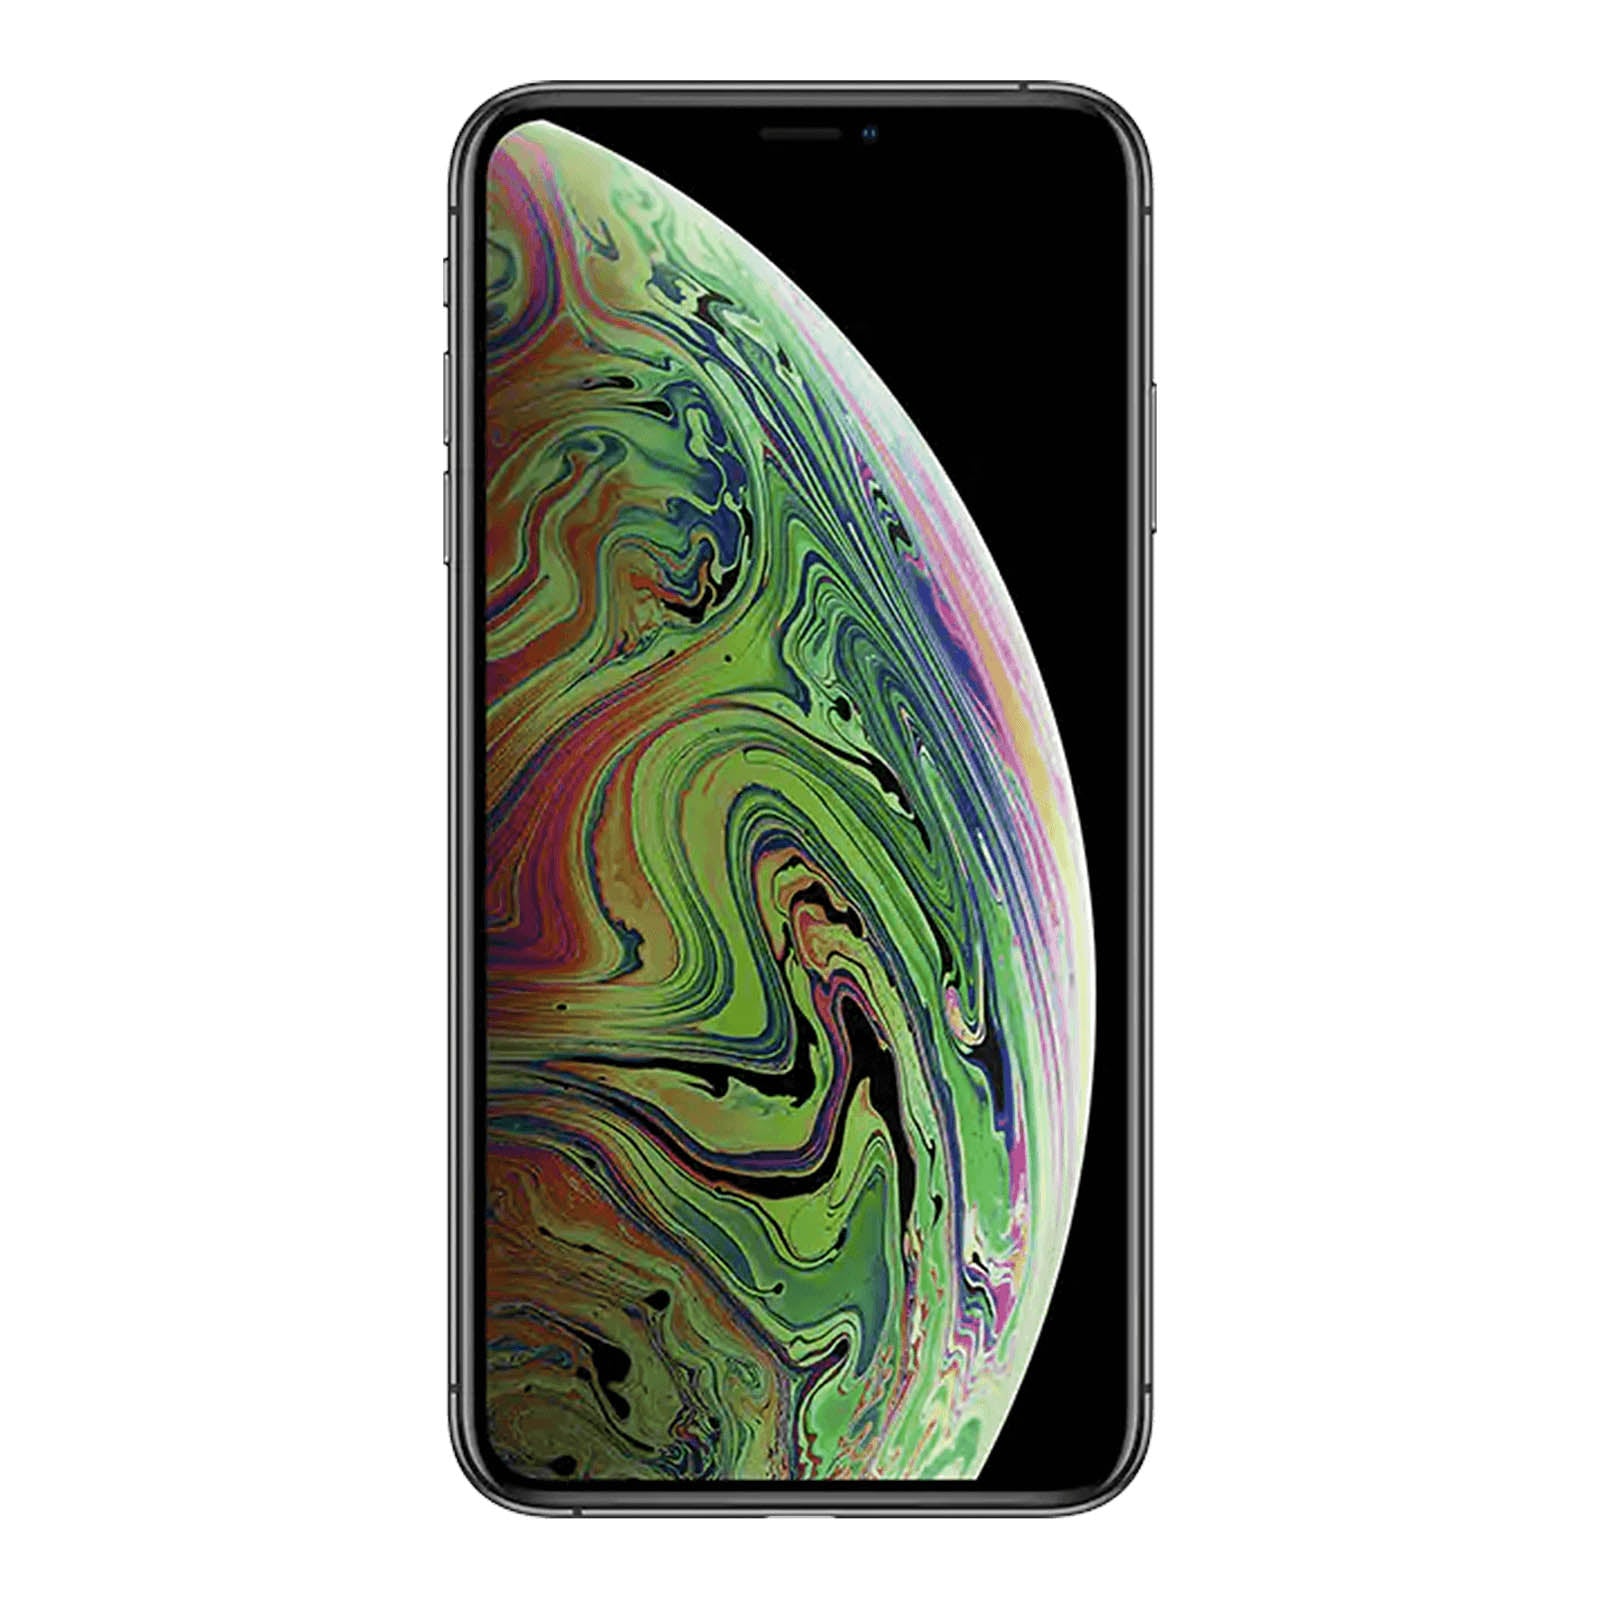 Apple iPhone XS Max 512GB Space Grey Very Good - AT&T